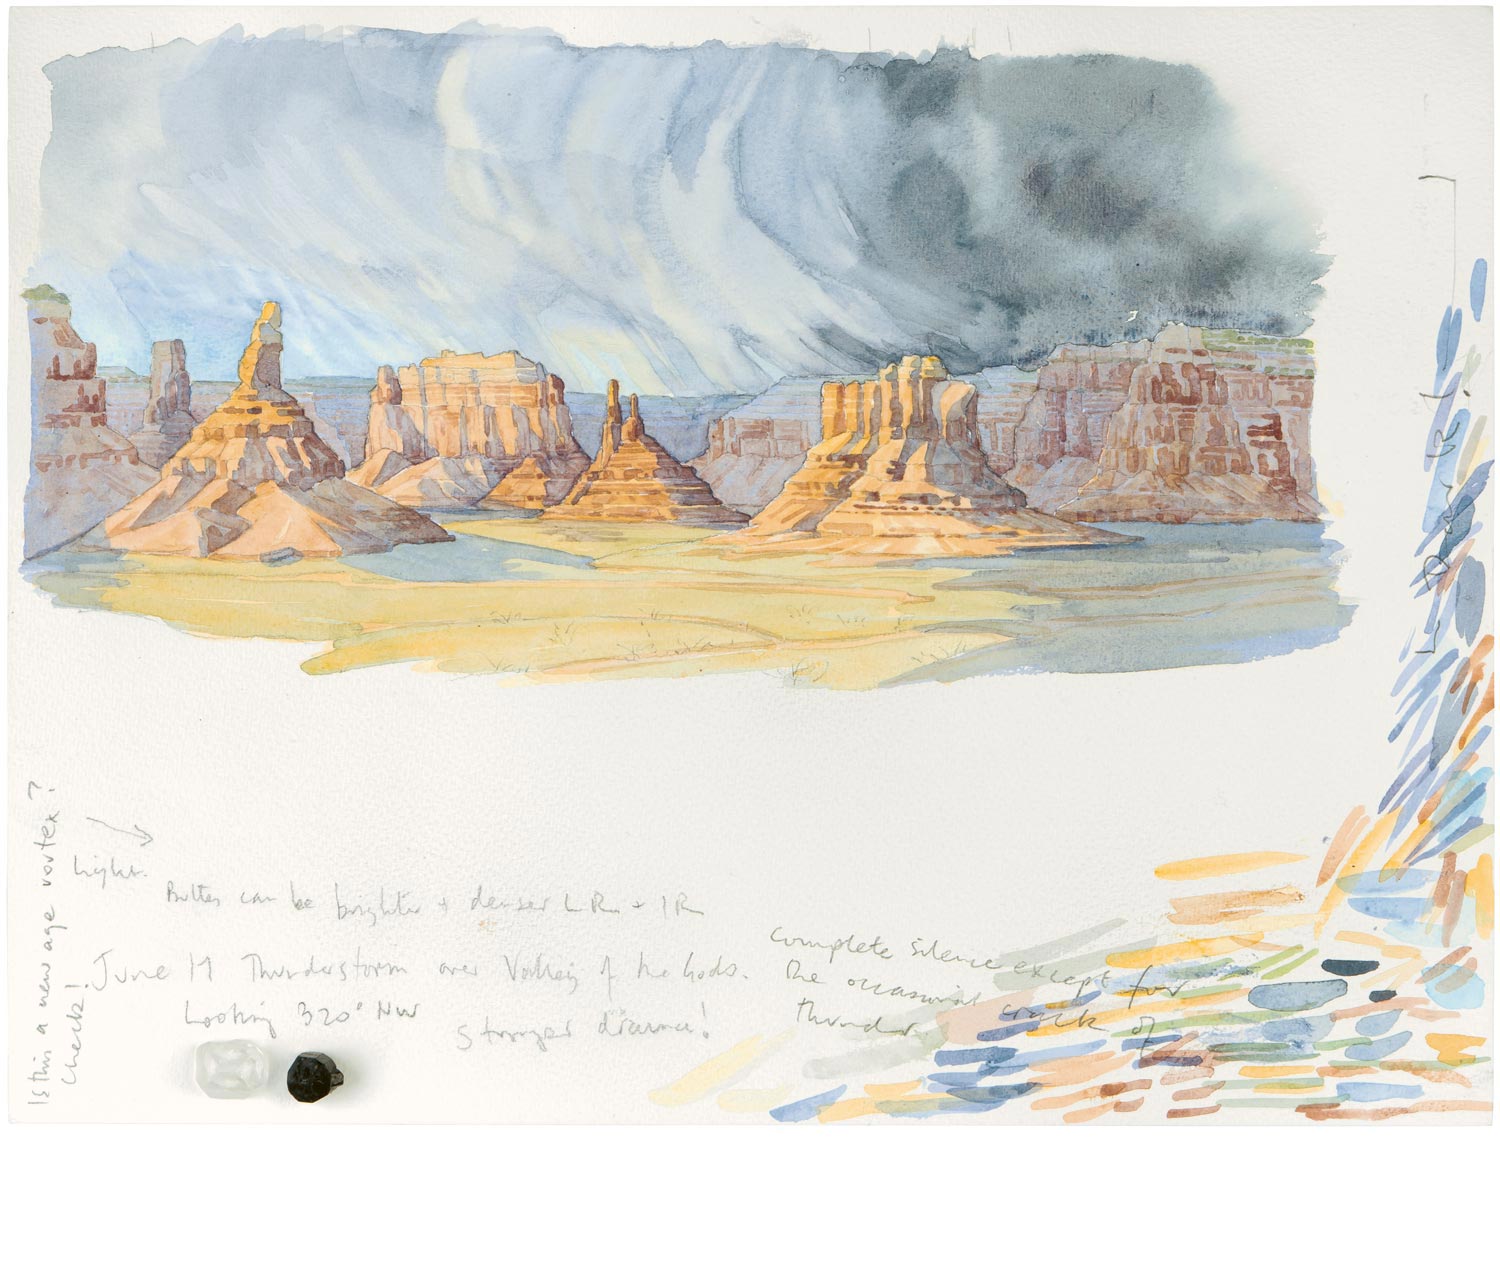   Tony Foster ,  Thunderstorm over the Valley of the Gods , 2011 